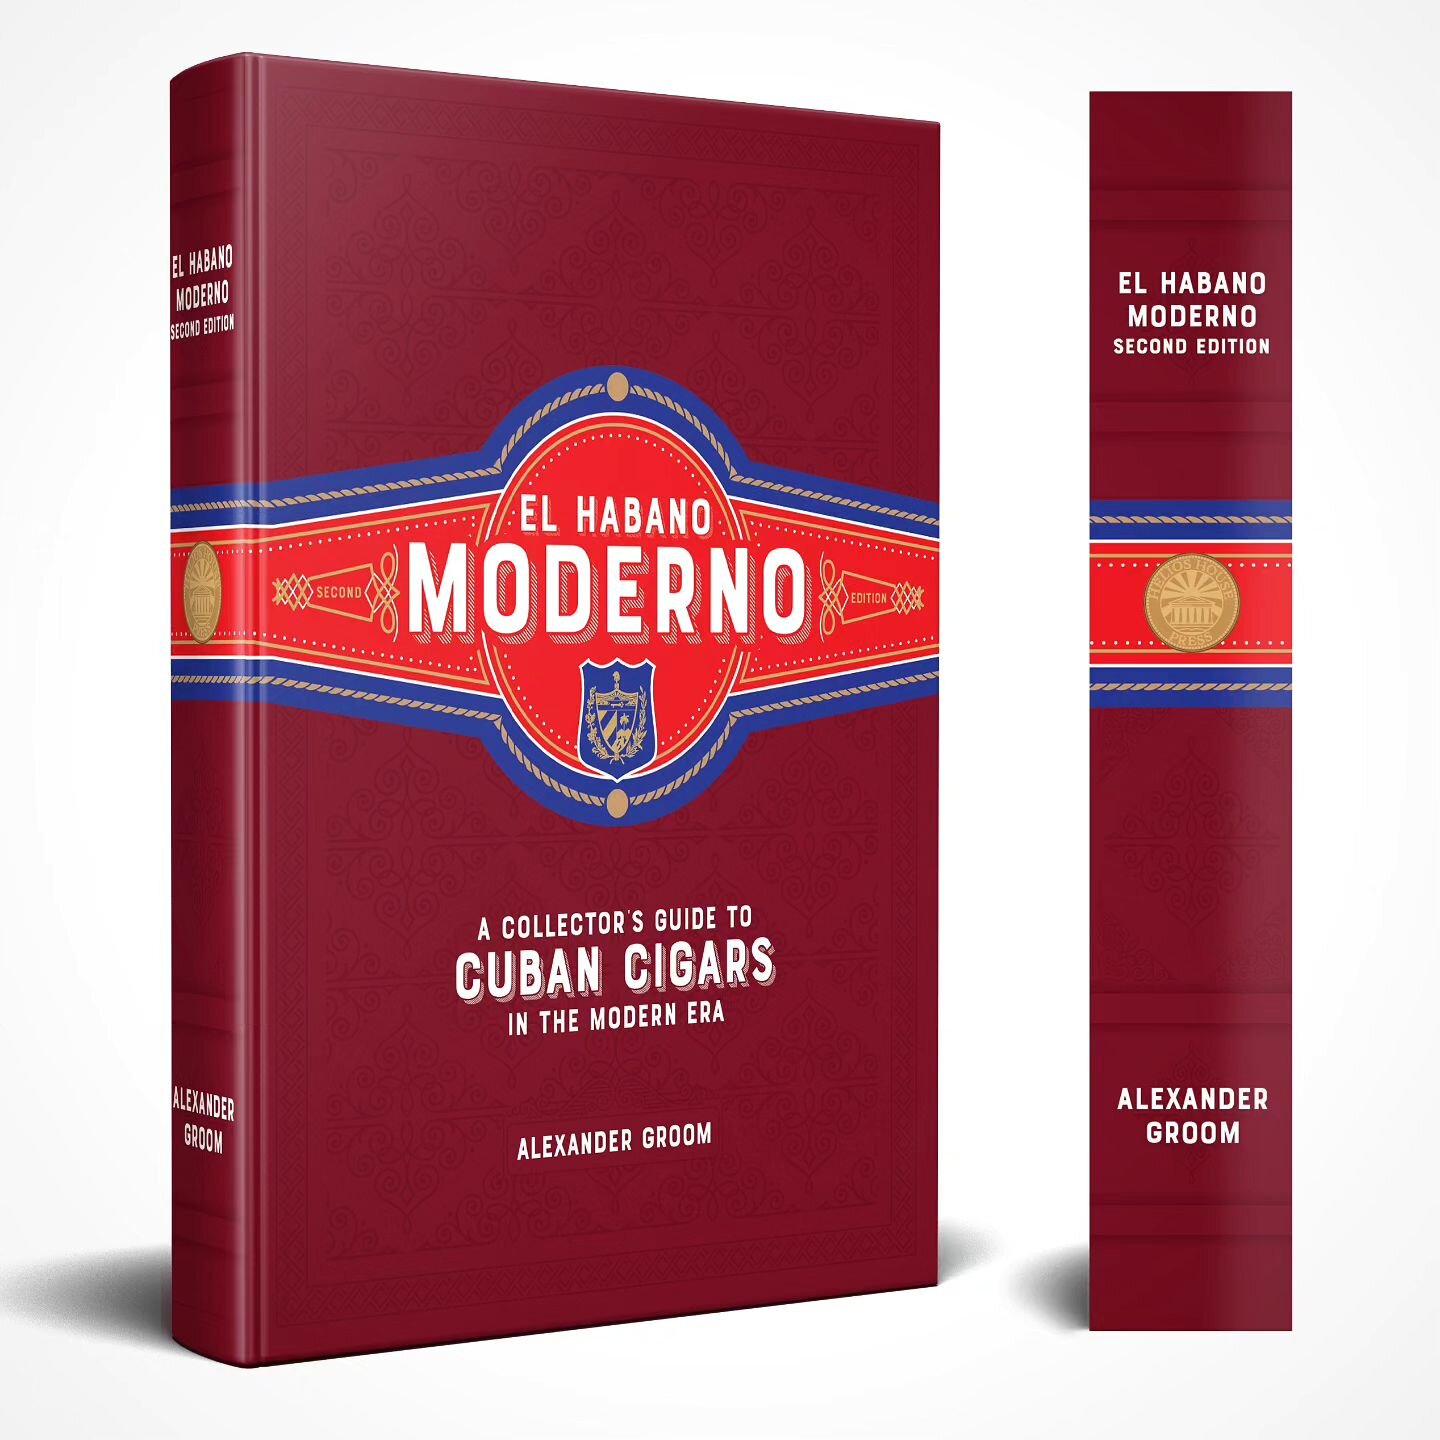 El Habano Moderno is receiving a second edition! 

Popular demand following the sell-out success of the first edition of Alexander Groom&rsquo;s definitive guide to Cuban cigars means we are opening pre-orders for the second edition now. 

Expected t